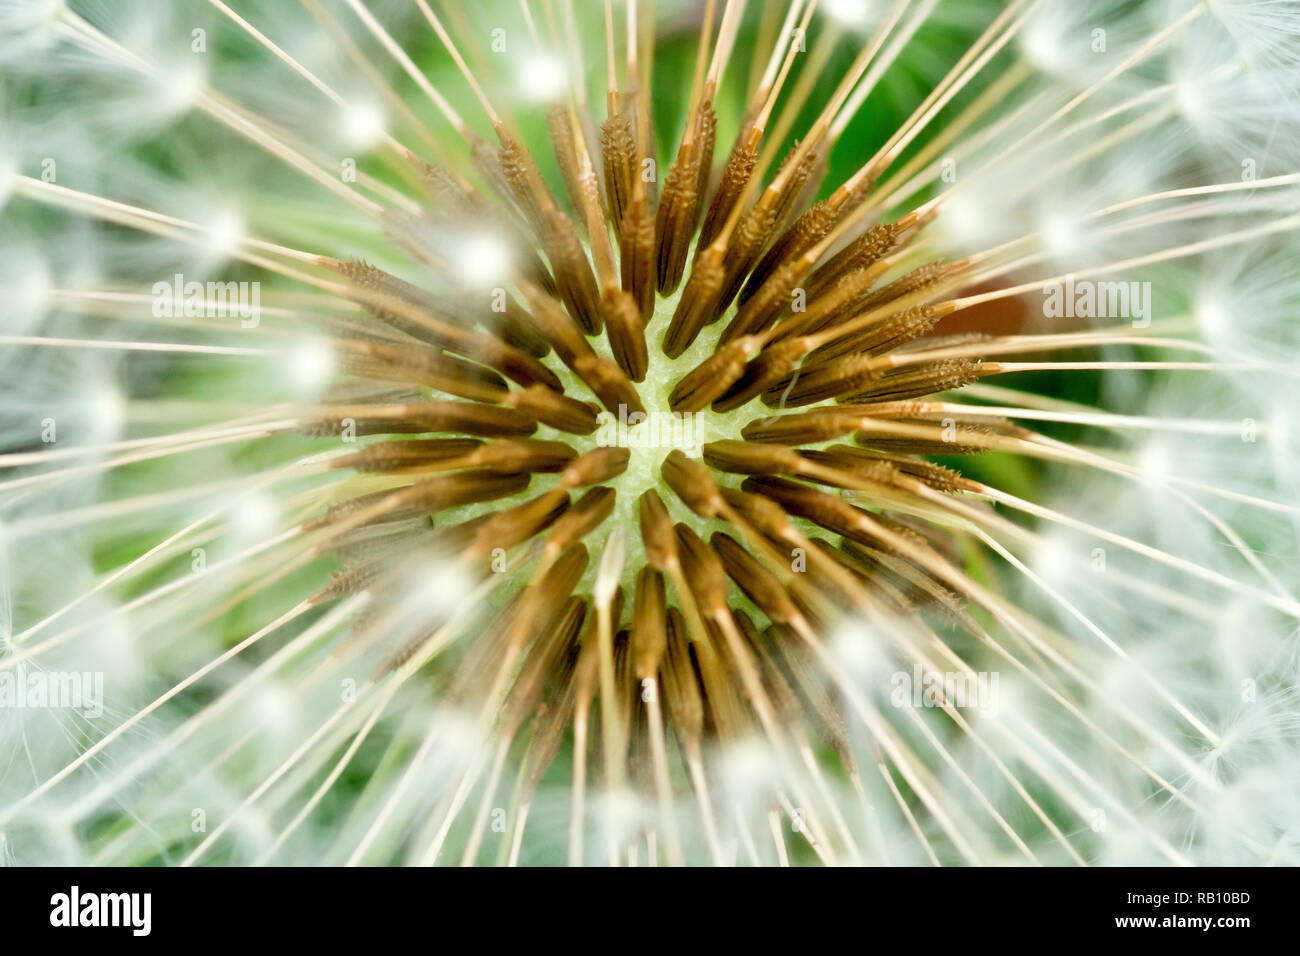 Dandelion seedhead (taraxacum officinale), close up of the very centre showing detail of the seeds. Stock Photo